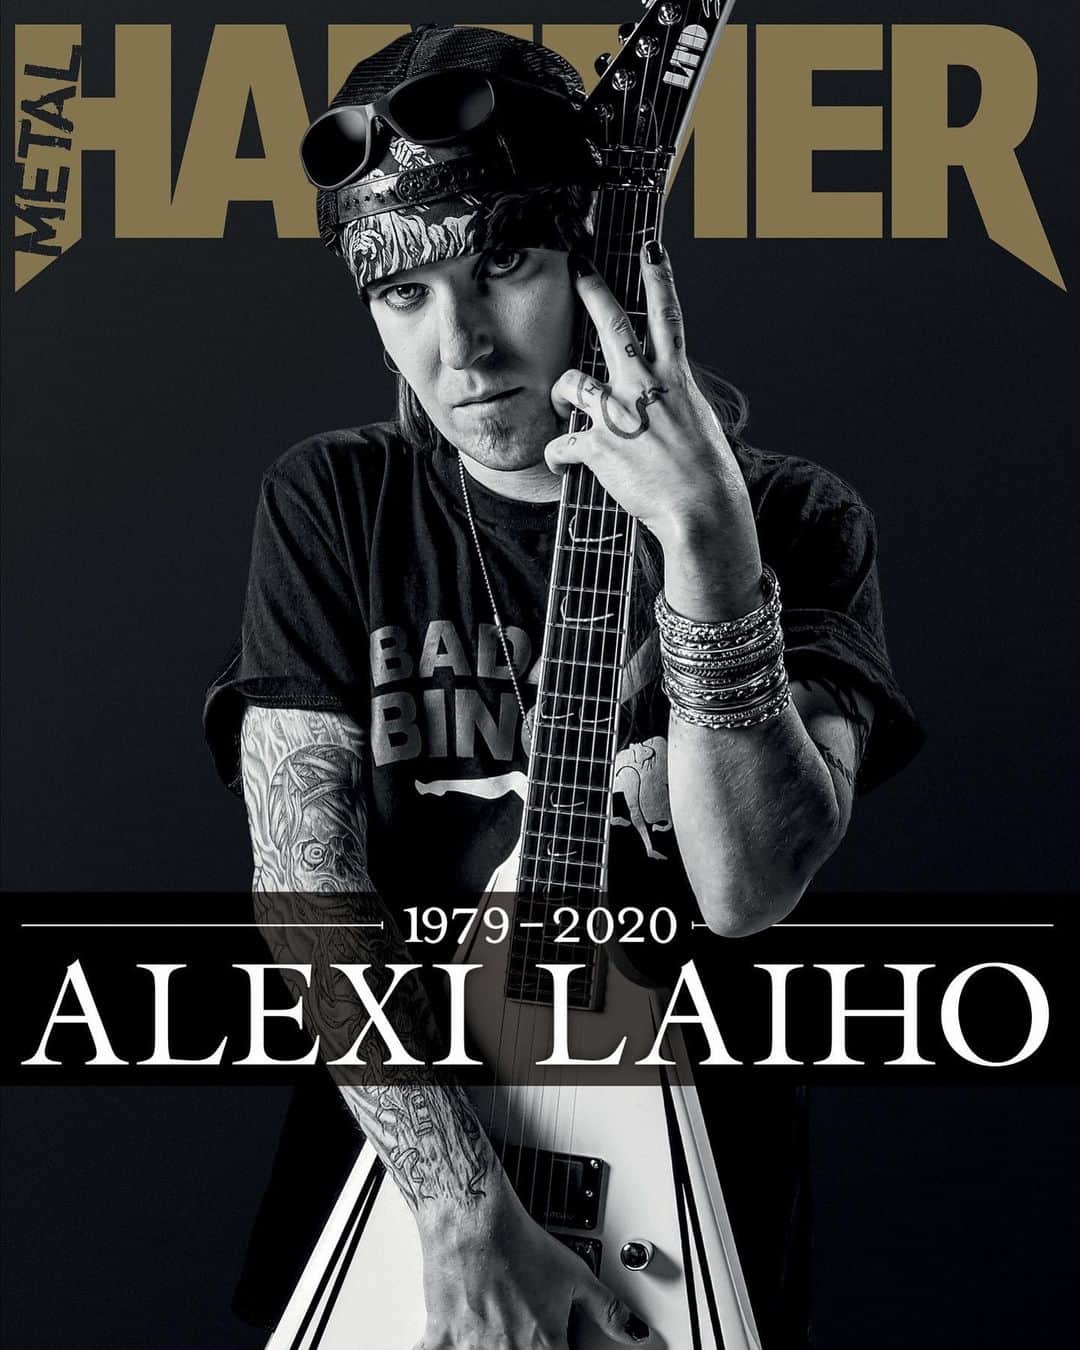 METAL HAMMERのインスタグラム：「At the end of 2020, metal lost an icon. The new issue of Metal Hammer is a tribute to Alexi Laiho - on sale tomorrow. #AlexiLaiho #ChildrenOfBodom #BodomAfterMidnight #Metal #HeavyMetal #MetalHammer」